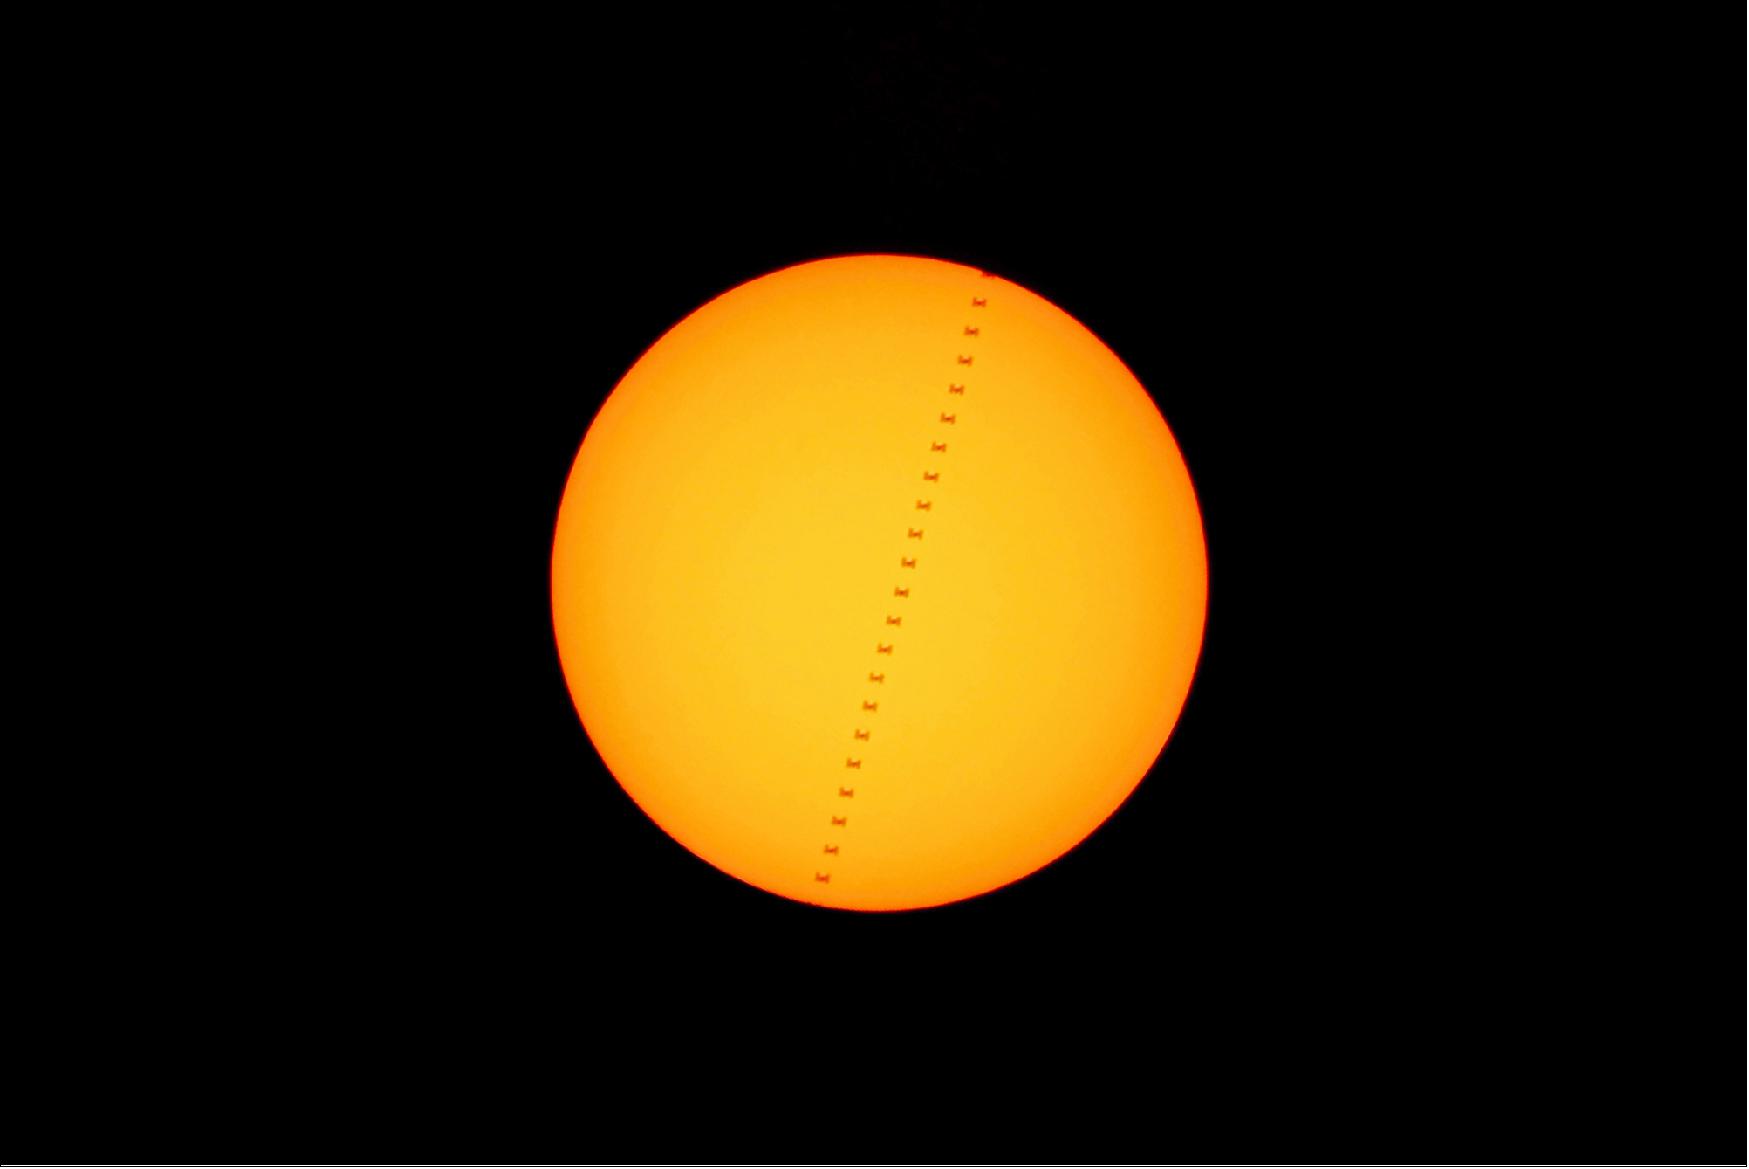 Figure 66: Like most people this season, the International Space Station is chasing some Sun. Amateur astrophotographer Javier Manteca captured this transit of the Sun on 2 August, at 17:10 CEST from Fuenlabrada in Spain (image credit: Javier Manteca)